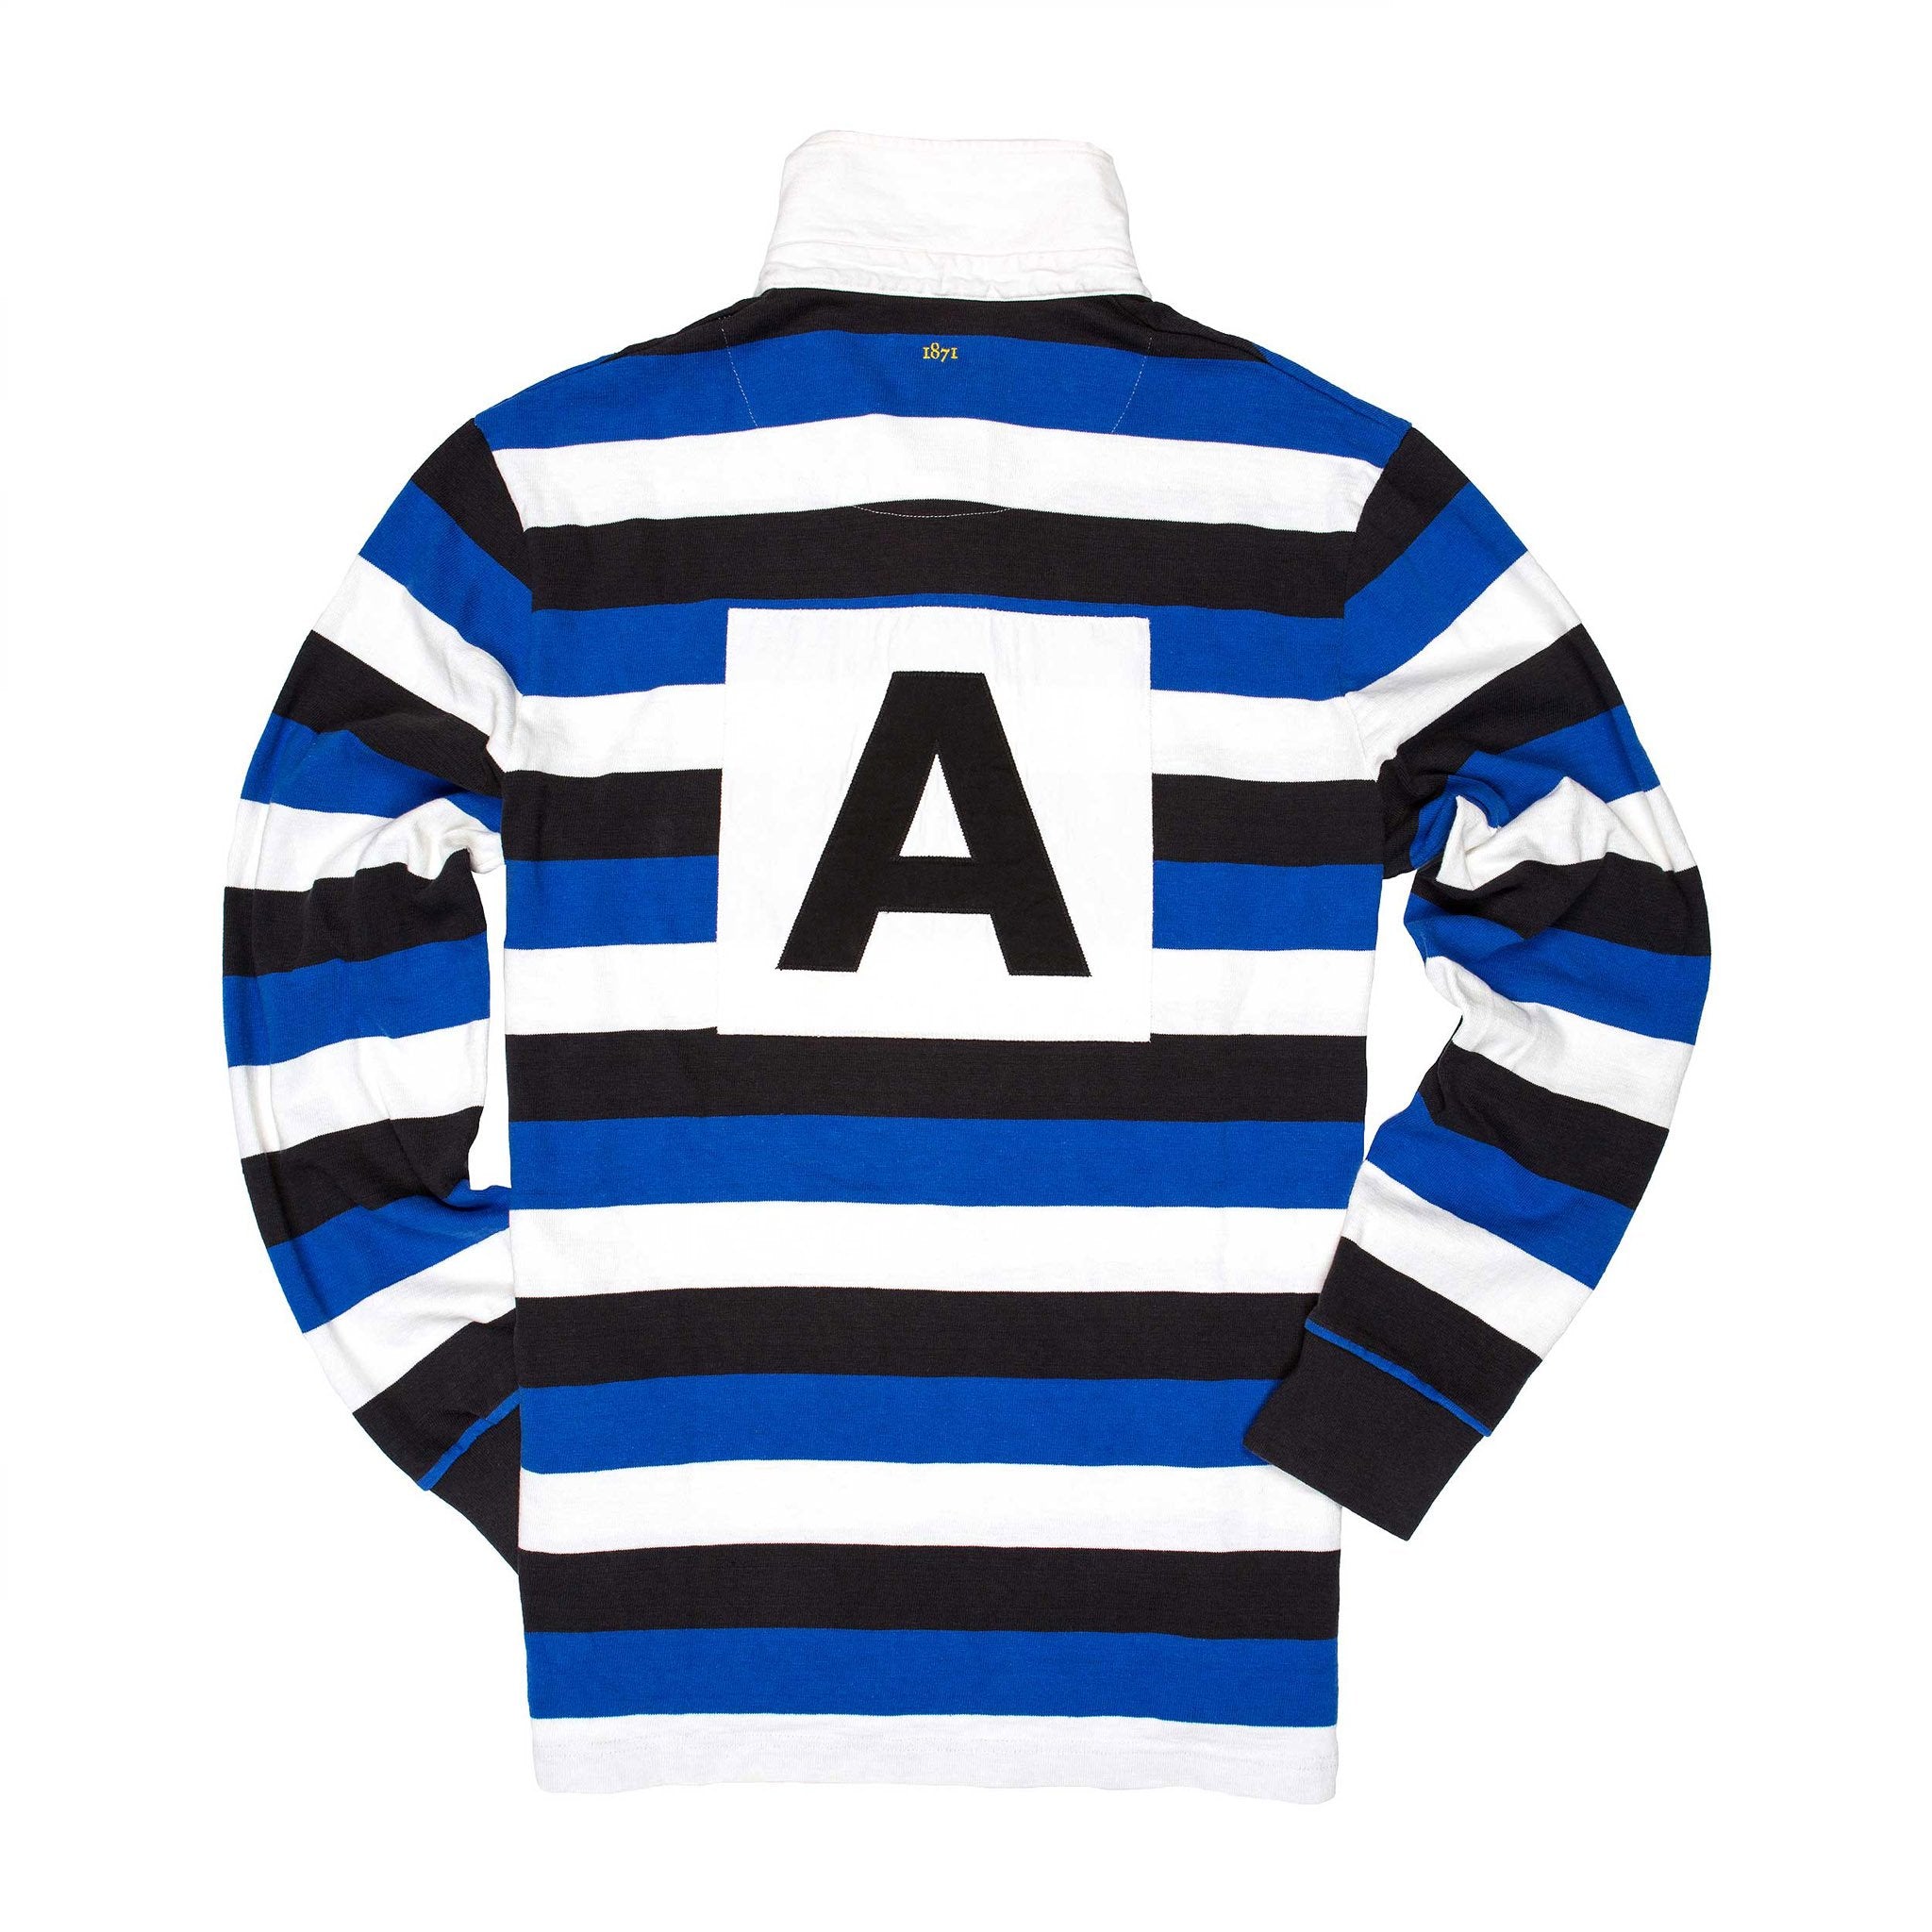 Black&Blue 1871 Founding 13 Rugby Shirts